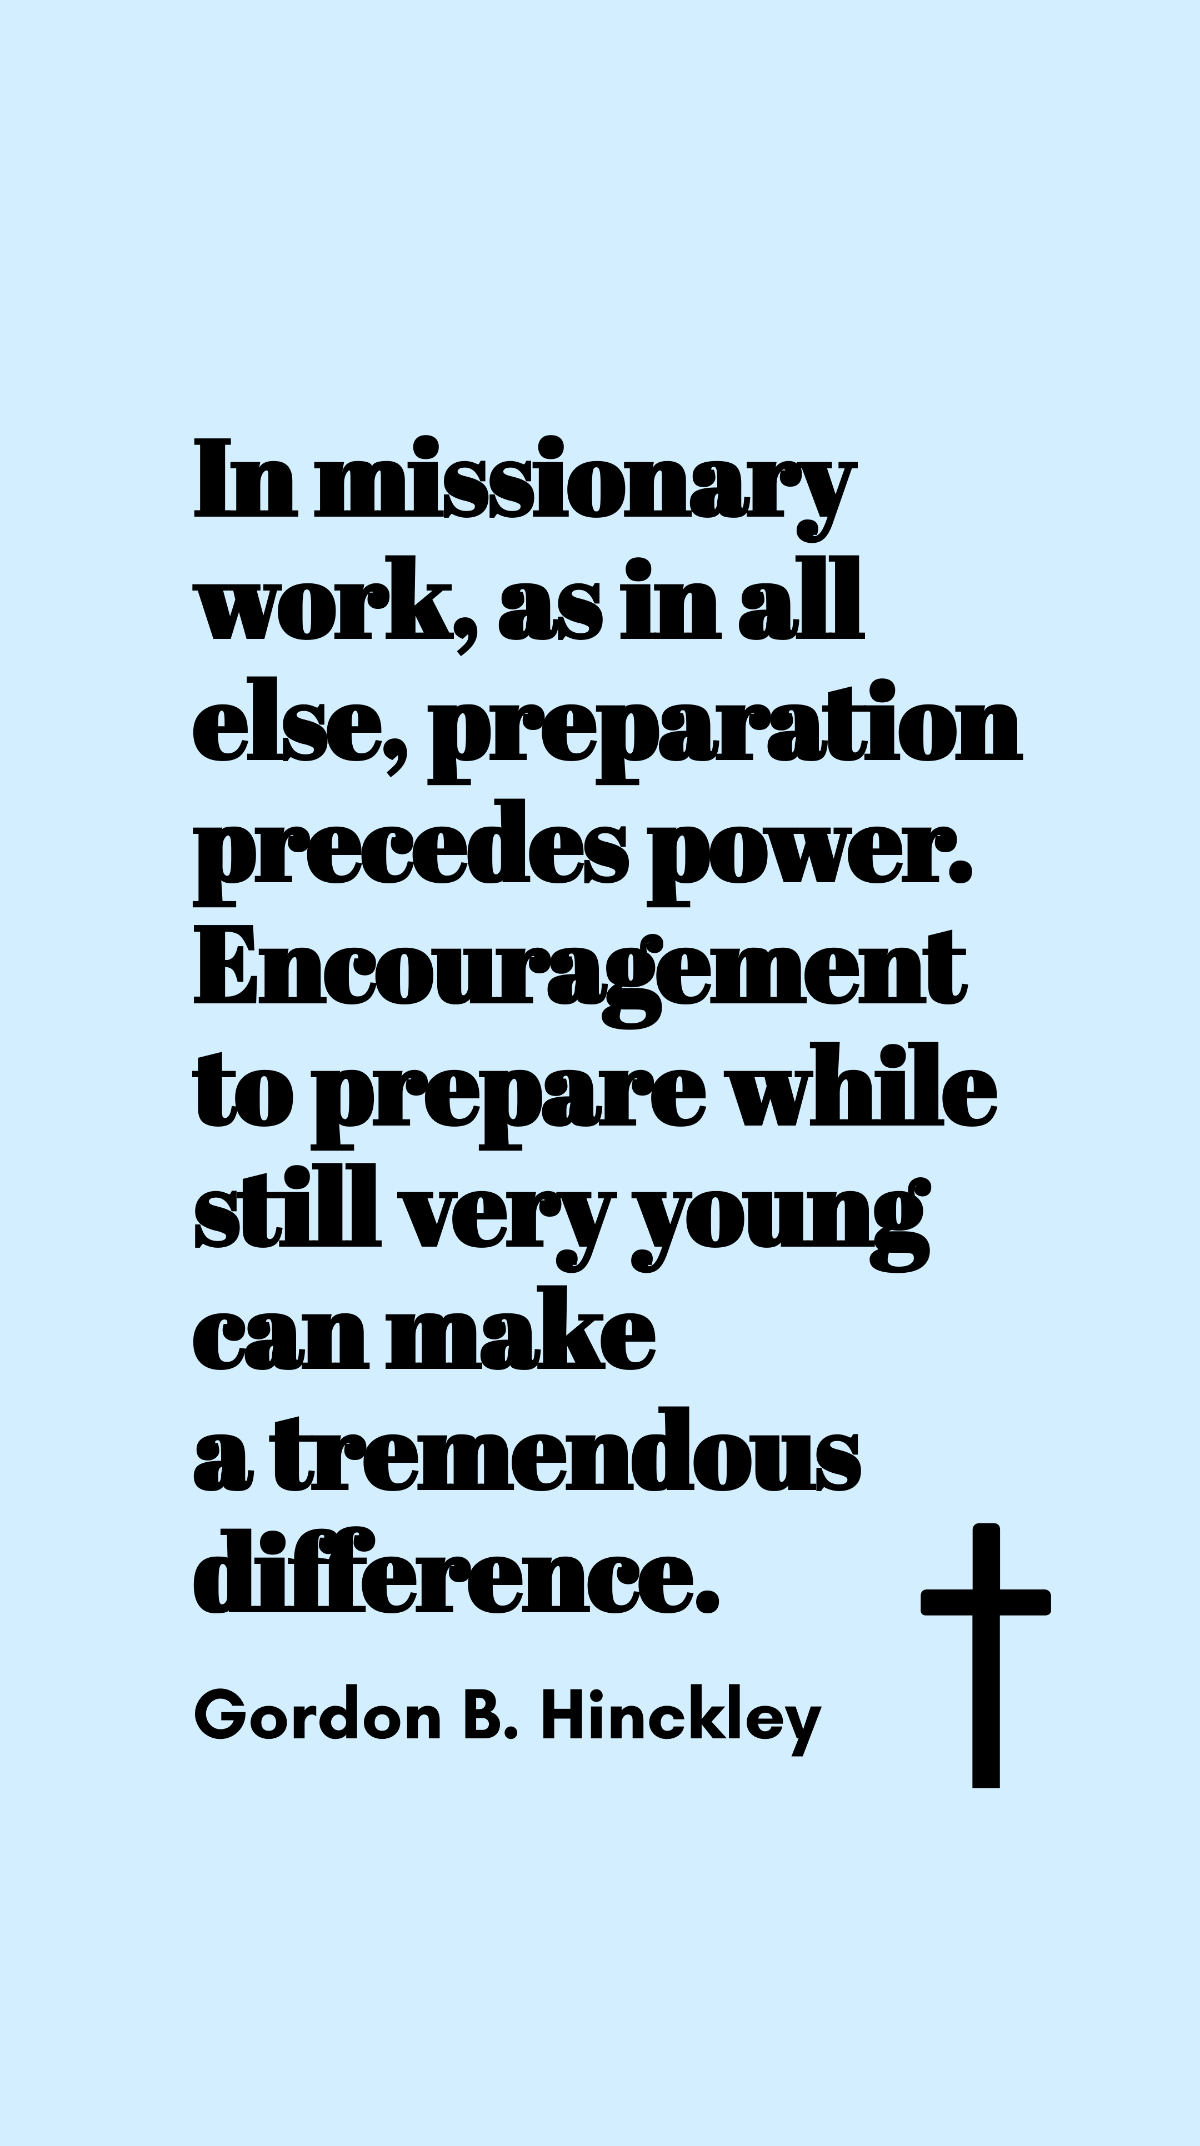 Free Gordon B. Hinckley - In missionary work, as in all else, preparation precedes power. Encouragement to prepare while still very young can make a tremendous difference. Template